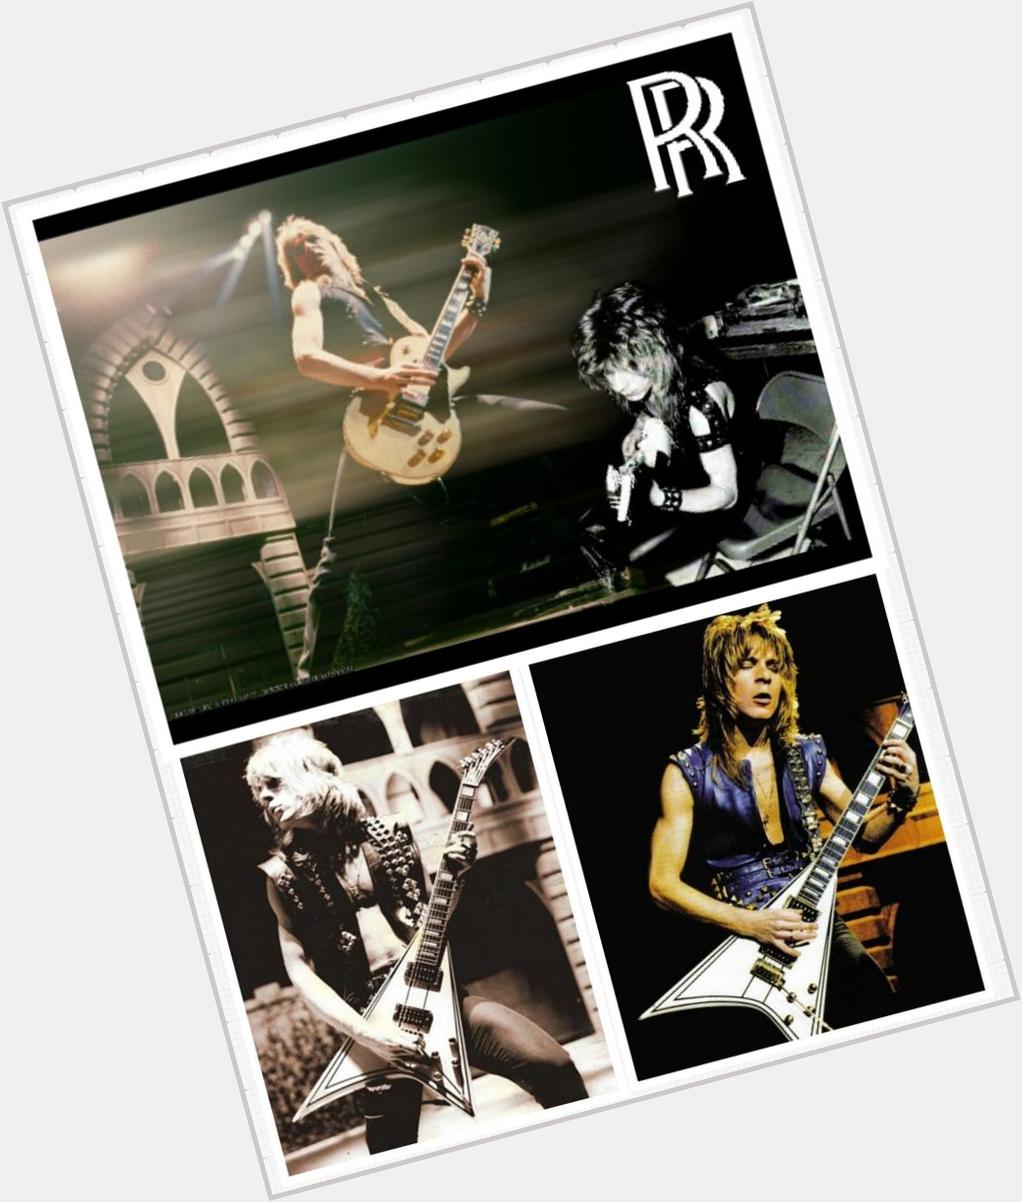 Long live the late great Randy Rhoads!! Happy Birthday to one of the greatest rock guitarists of our time! 